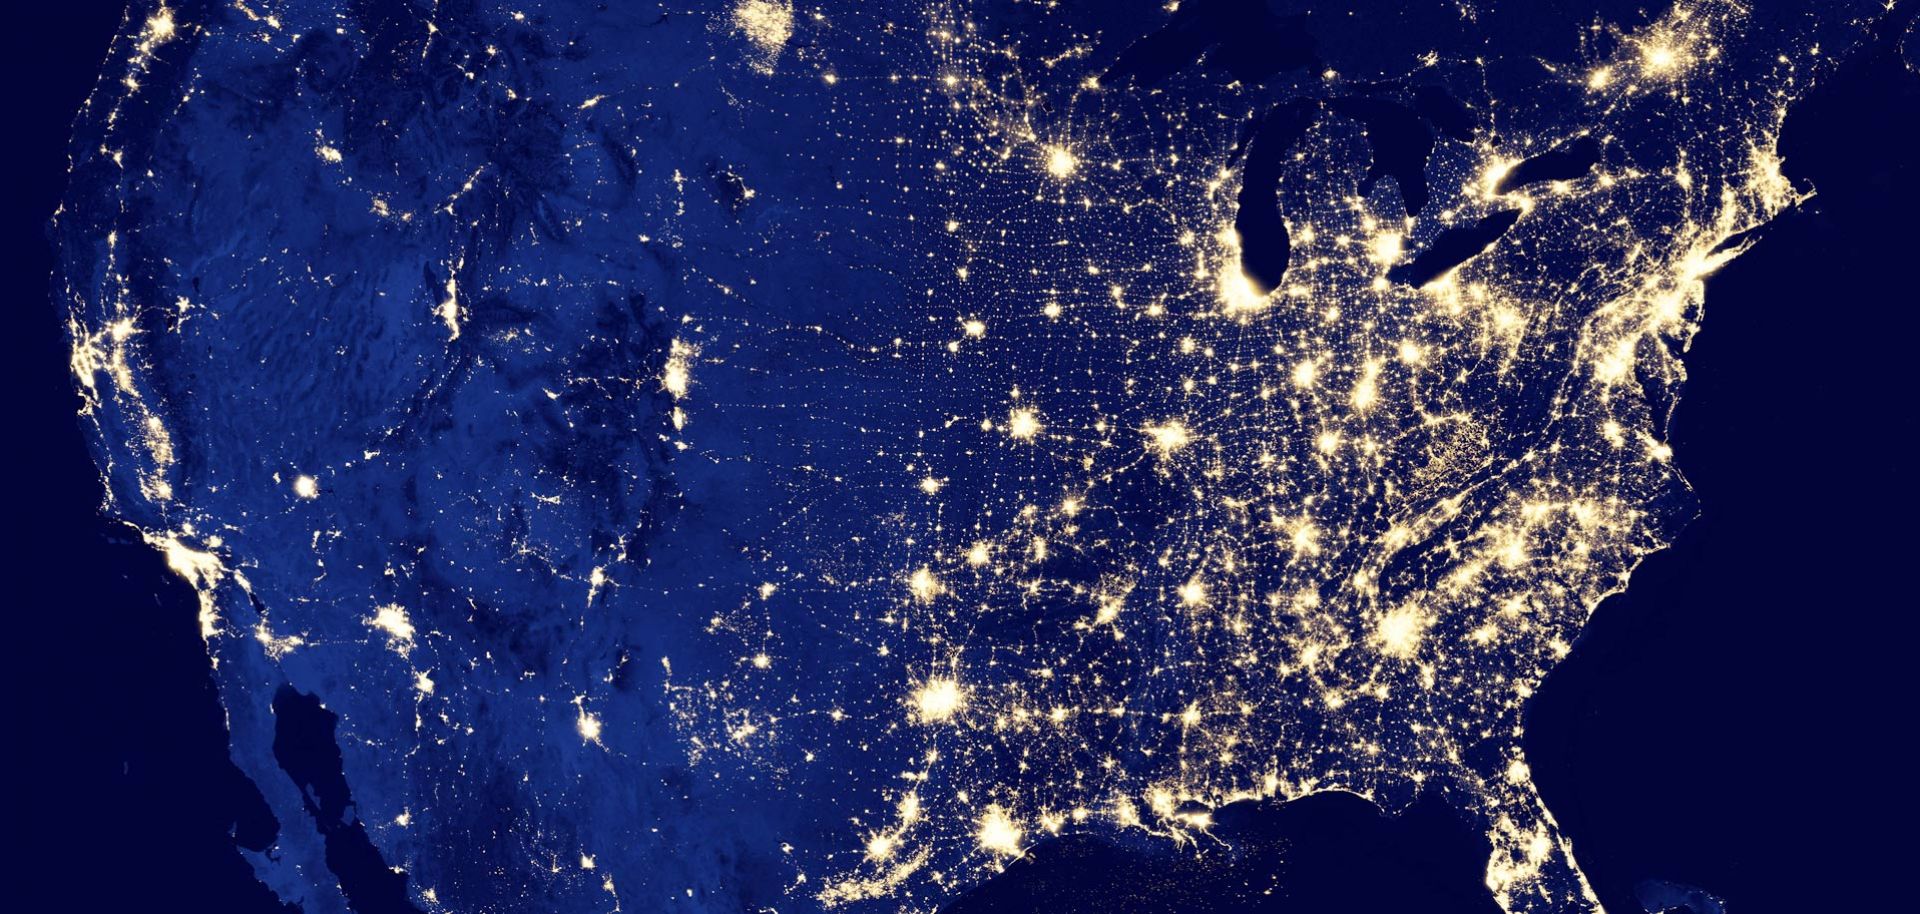 The United States at night, an image made possible by a new satellite that detects light in a range of wavelengths from green to near-infrared and uses filtering techniques to observe dim signals.